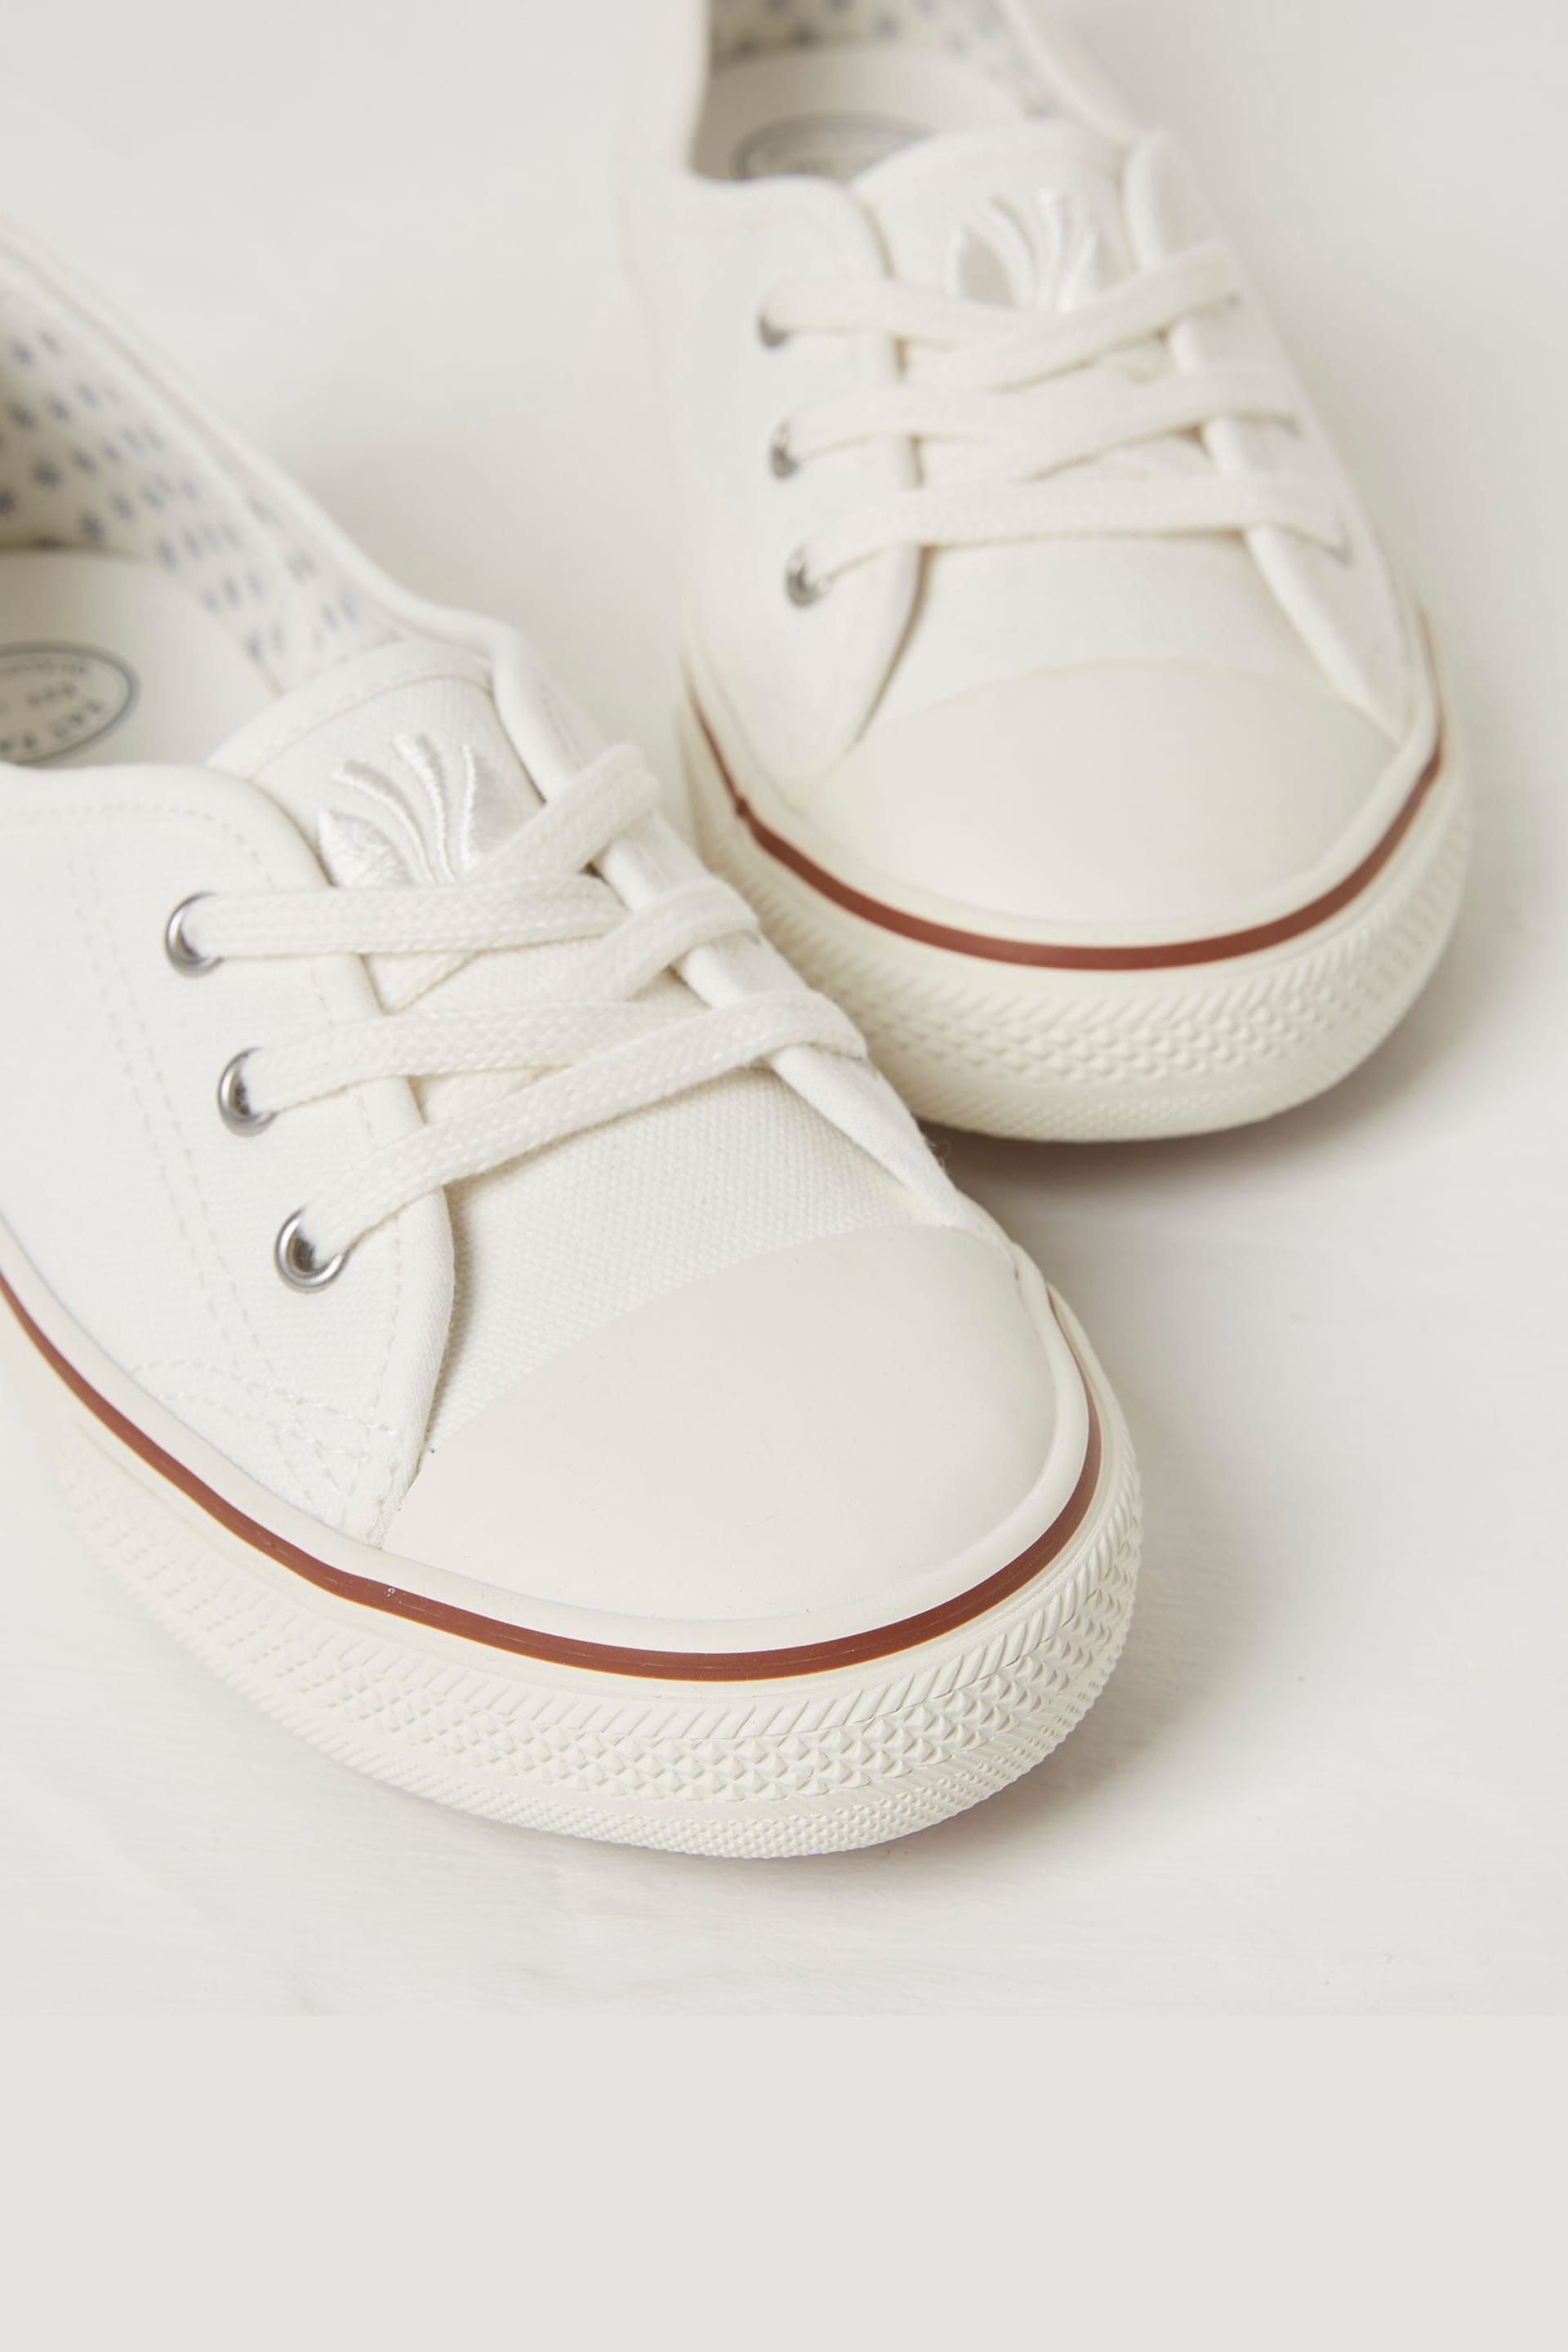 FatFace White Suzie Ballet Trainers - Image 3 of 3